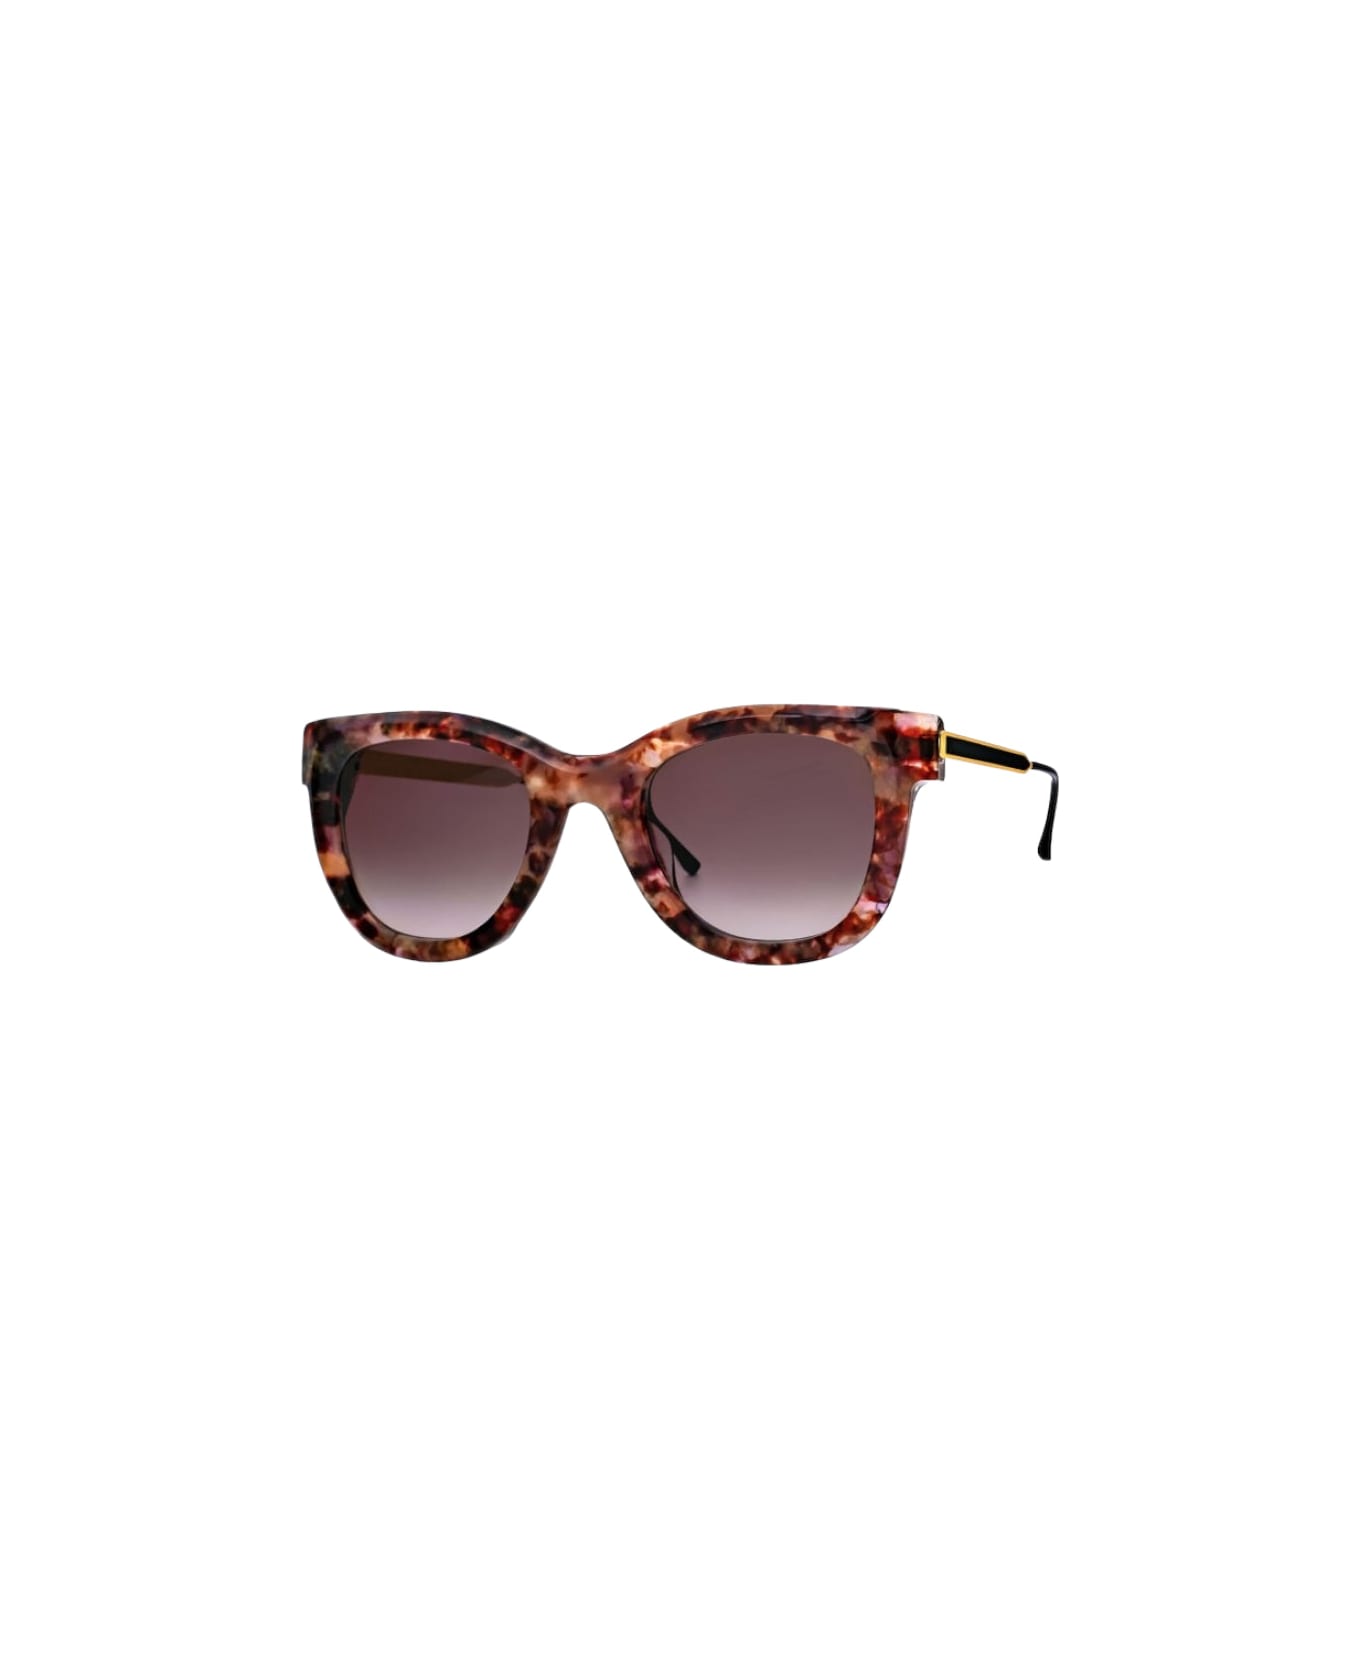 Thierry Lasry Nudity - Pink Pattern Sunglasses